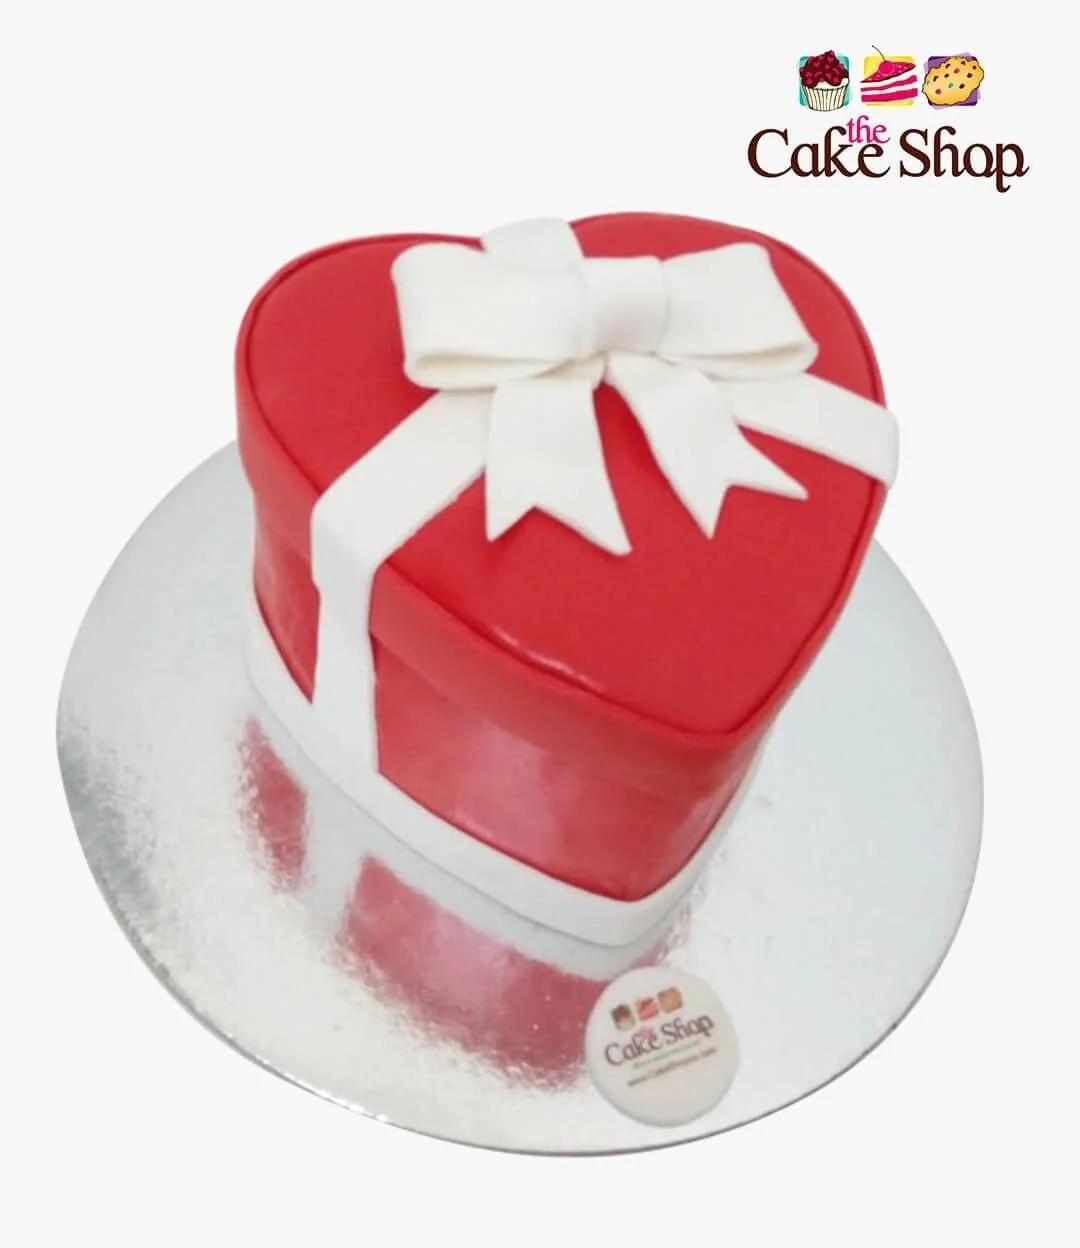  Red Heart with White Bow Cake by The Cake Shop 